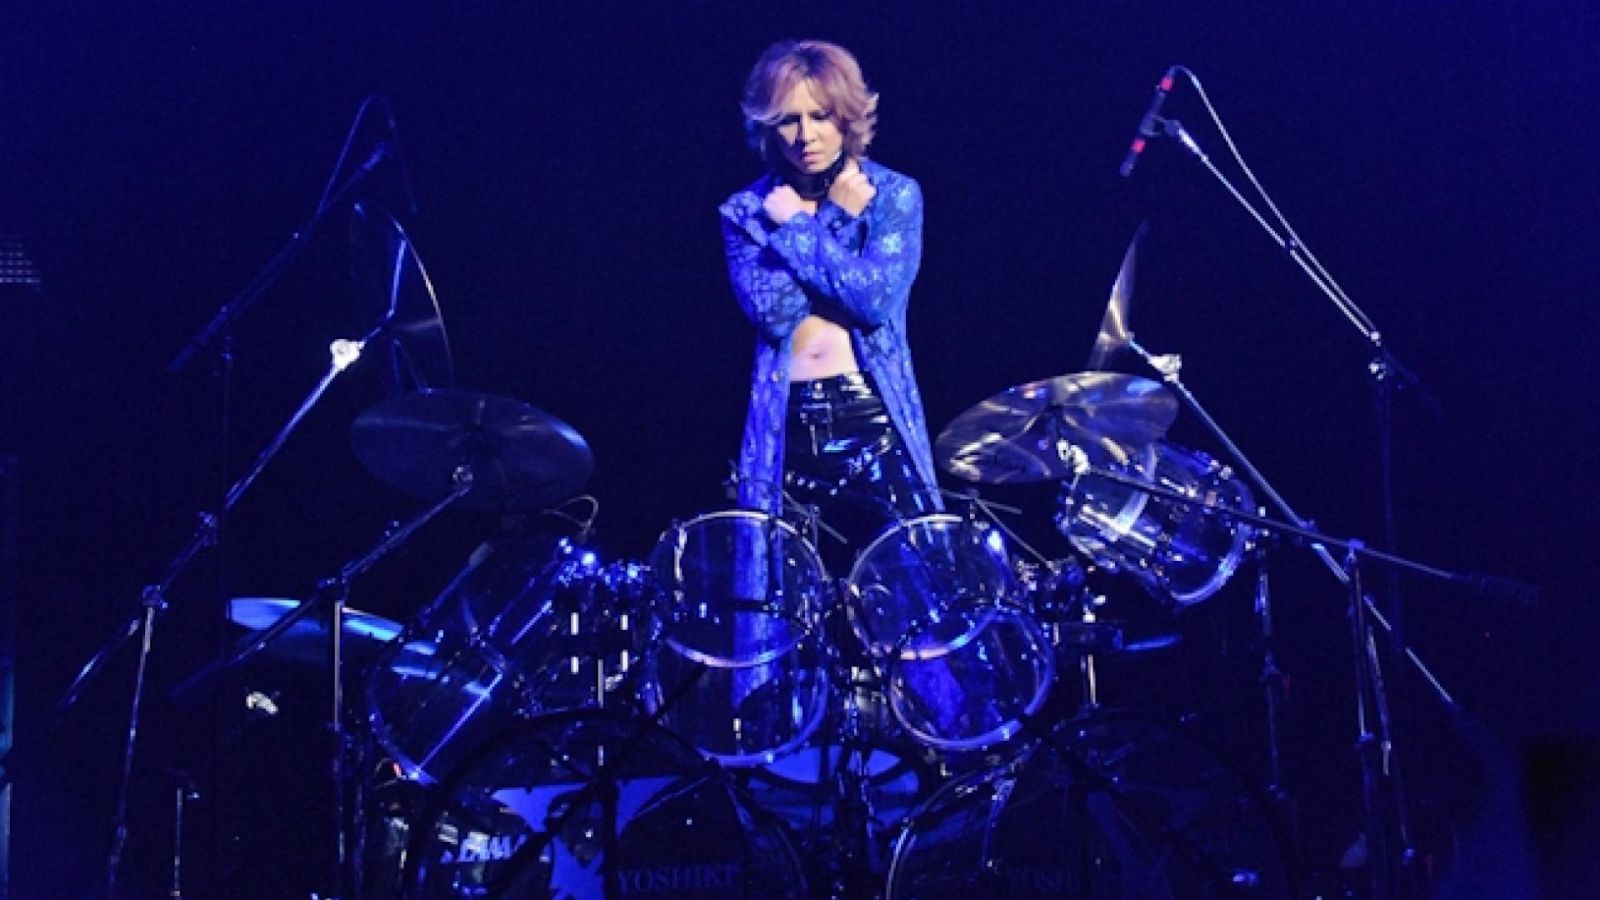 Interview With Yoshiki In Brazil